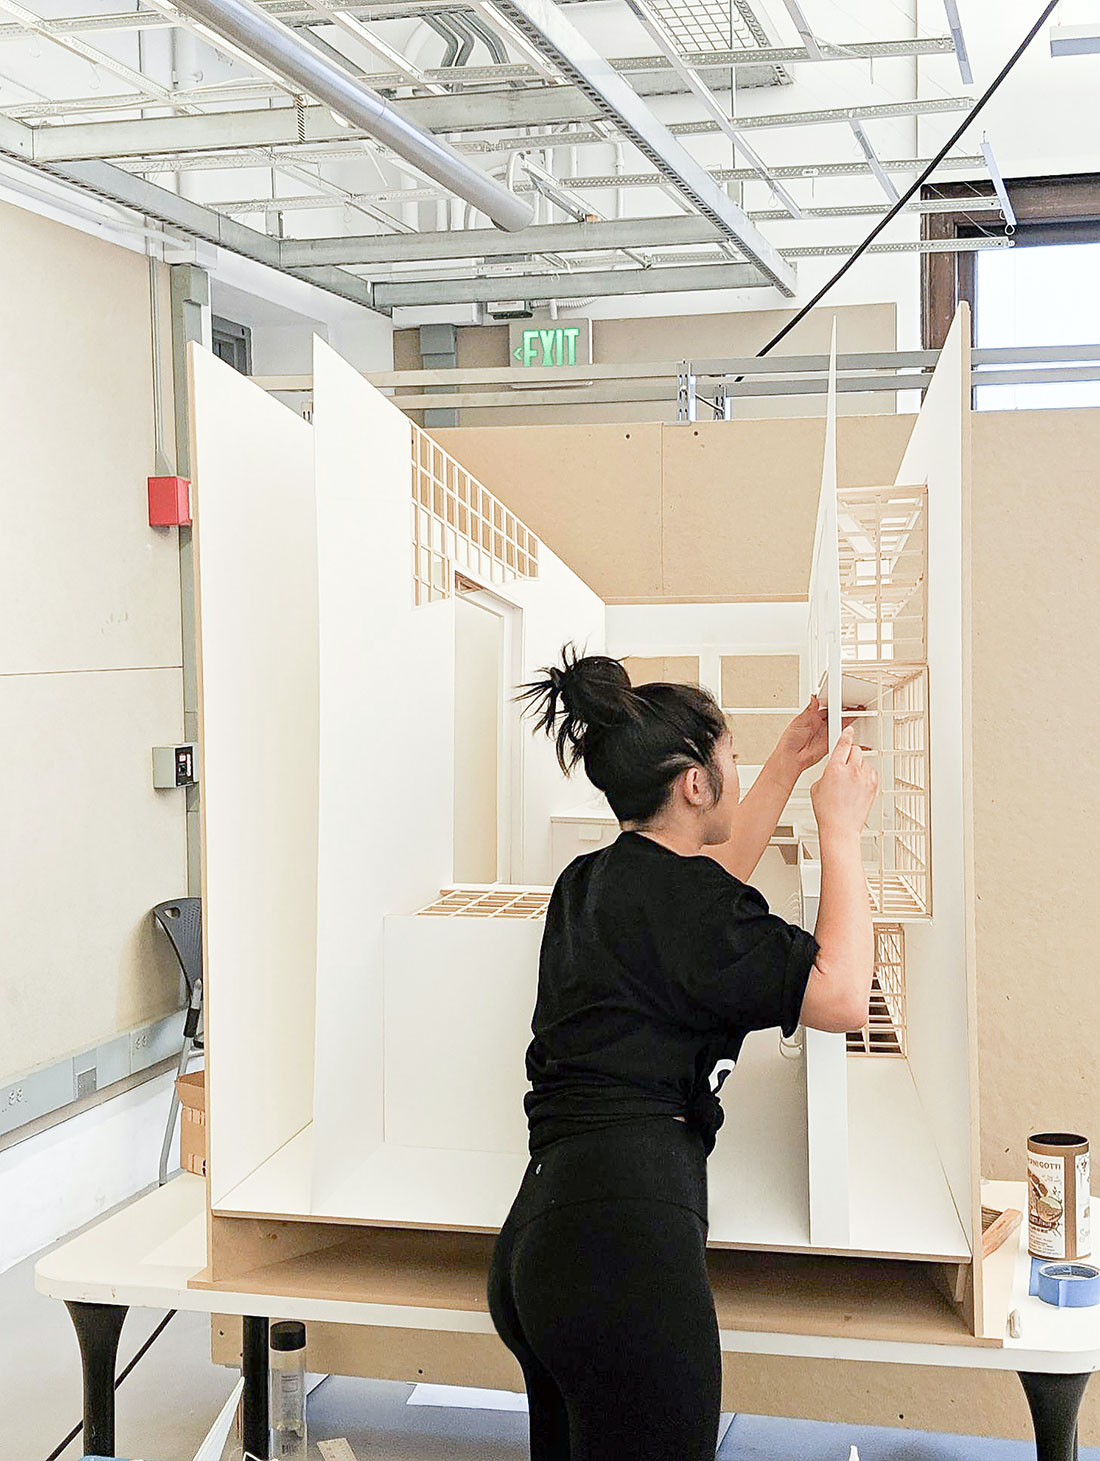 Danya Li building her thesis project in the School of Architecture